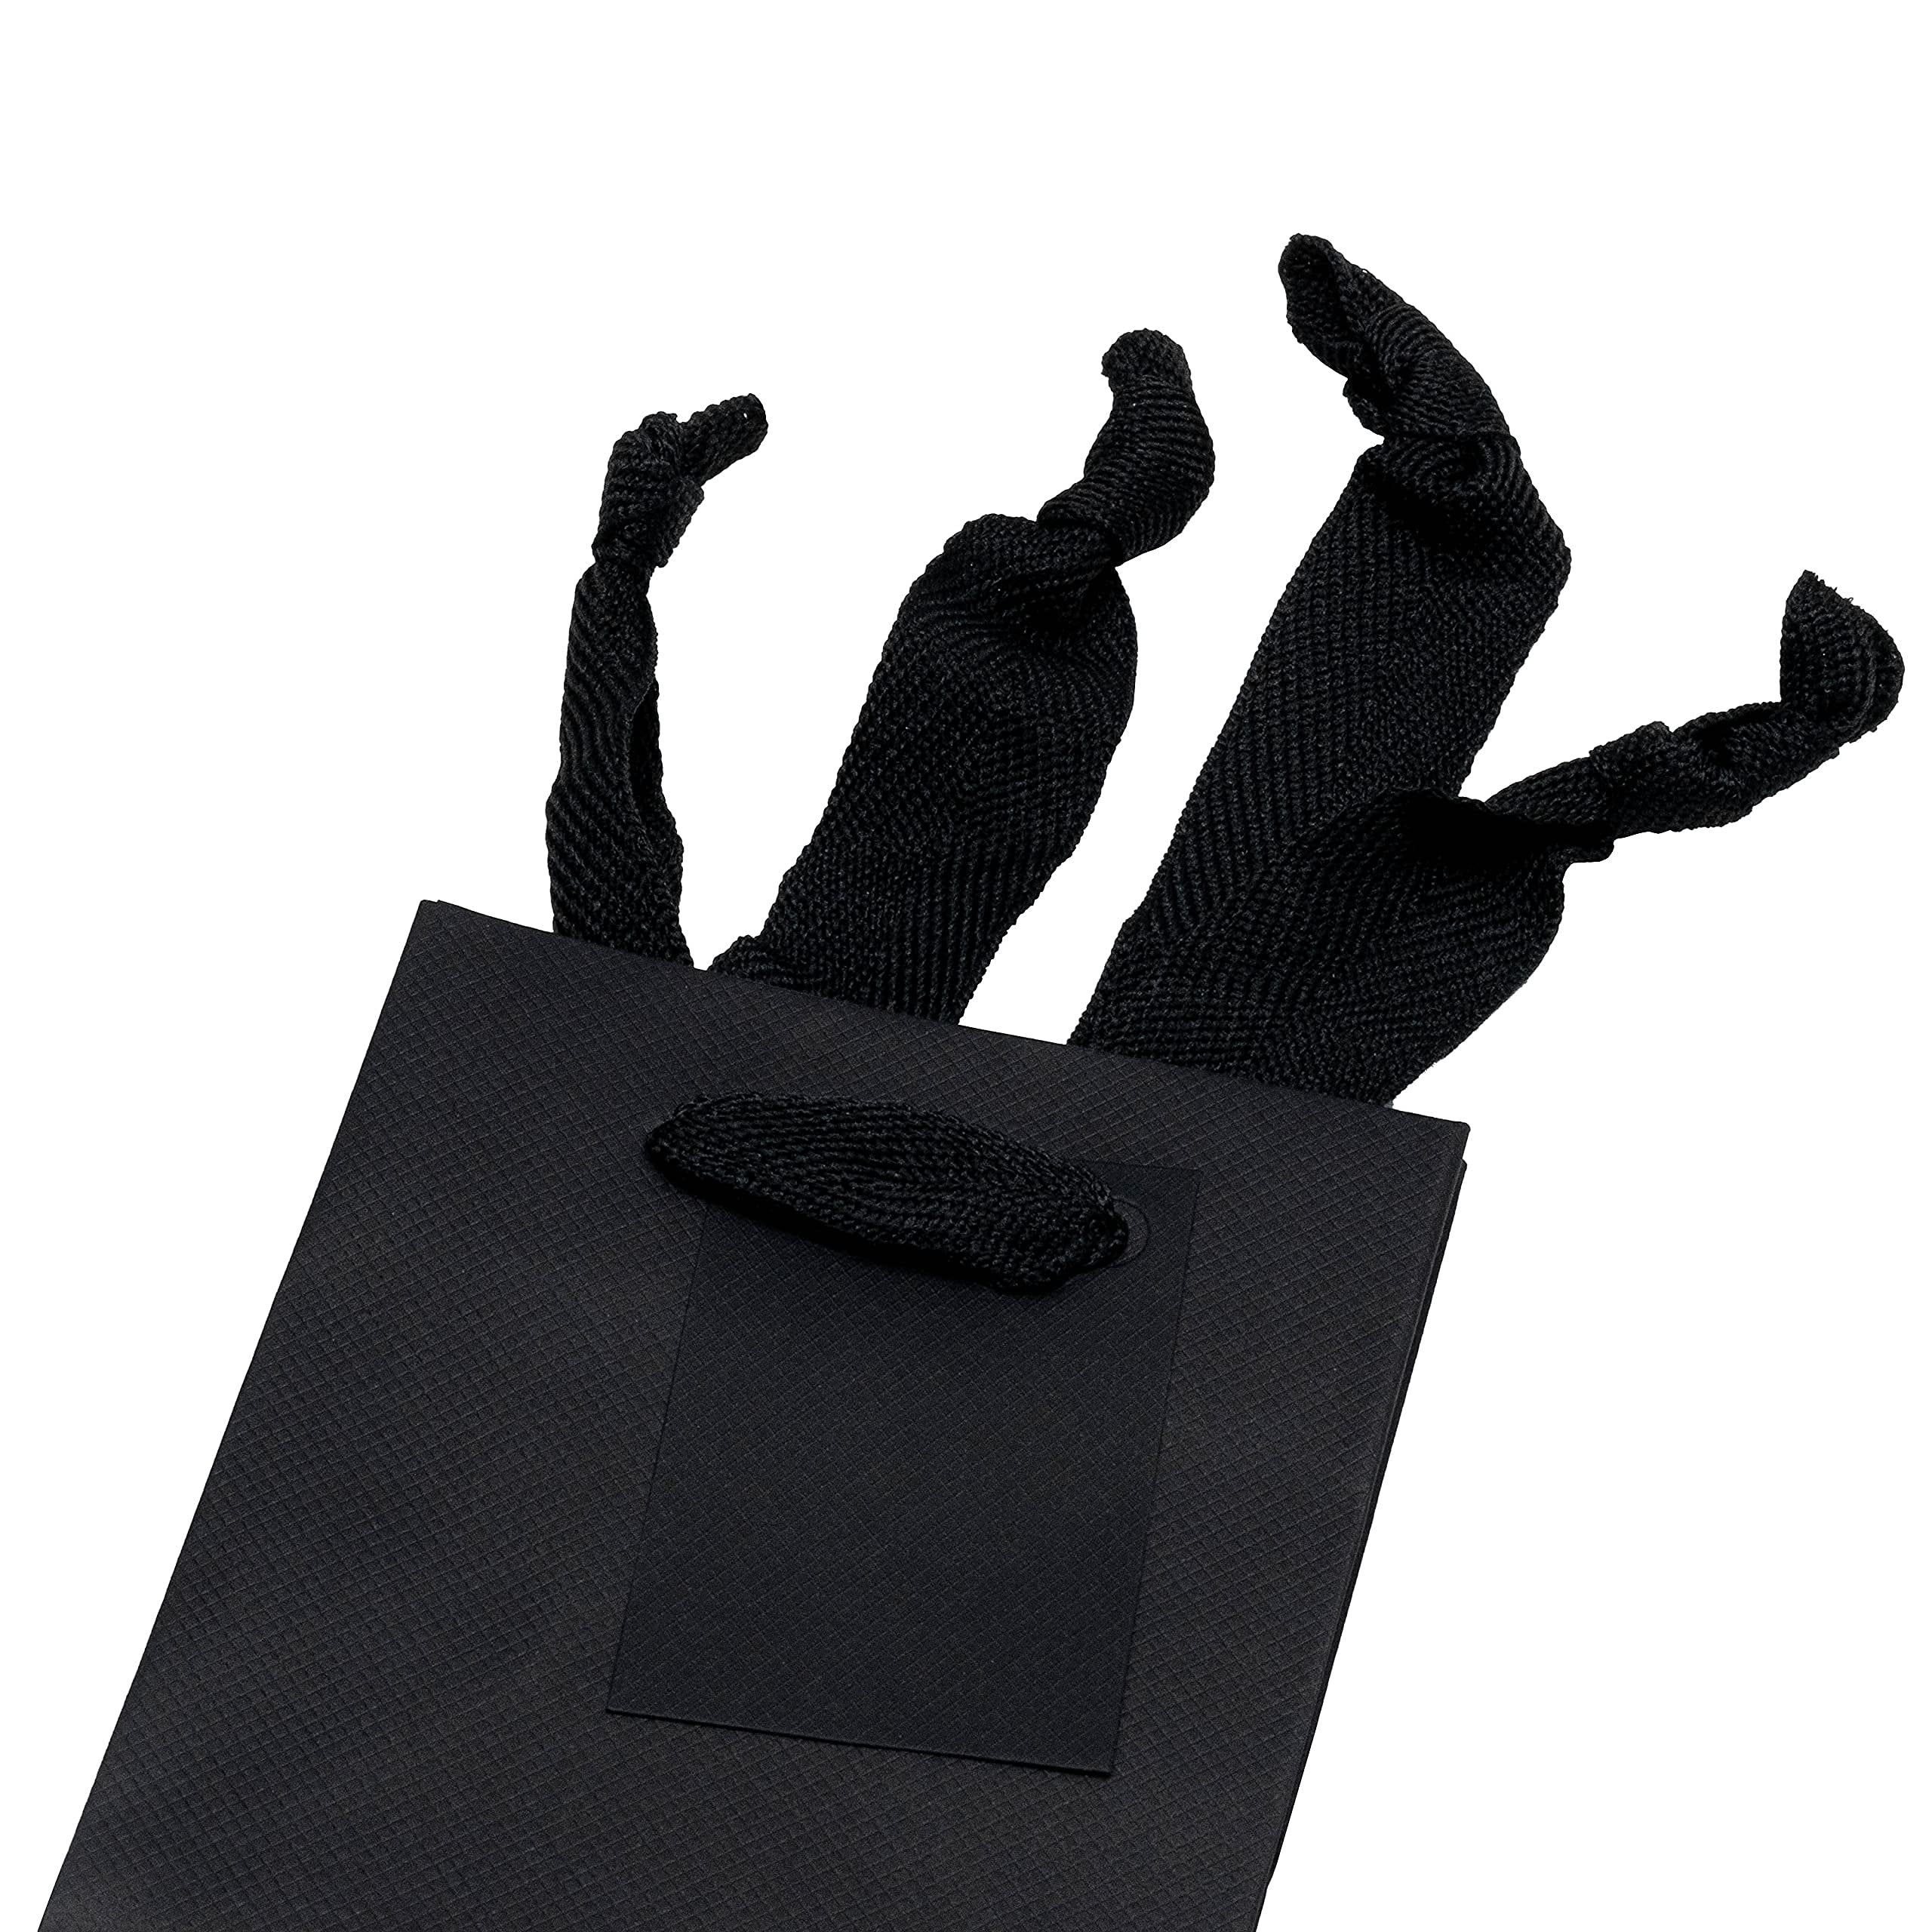 12 Pack Black Paper Gift Bags w/ Handles - 4x2.75x4.5 Inch Size, Designer Wrap for Little Presents, Ideal for Events, Holidays, Bulk